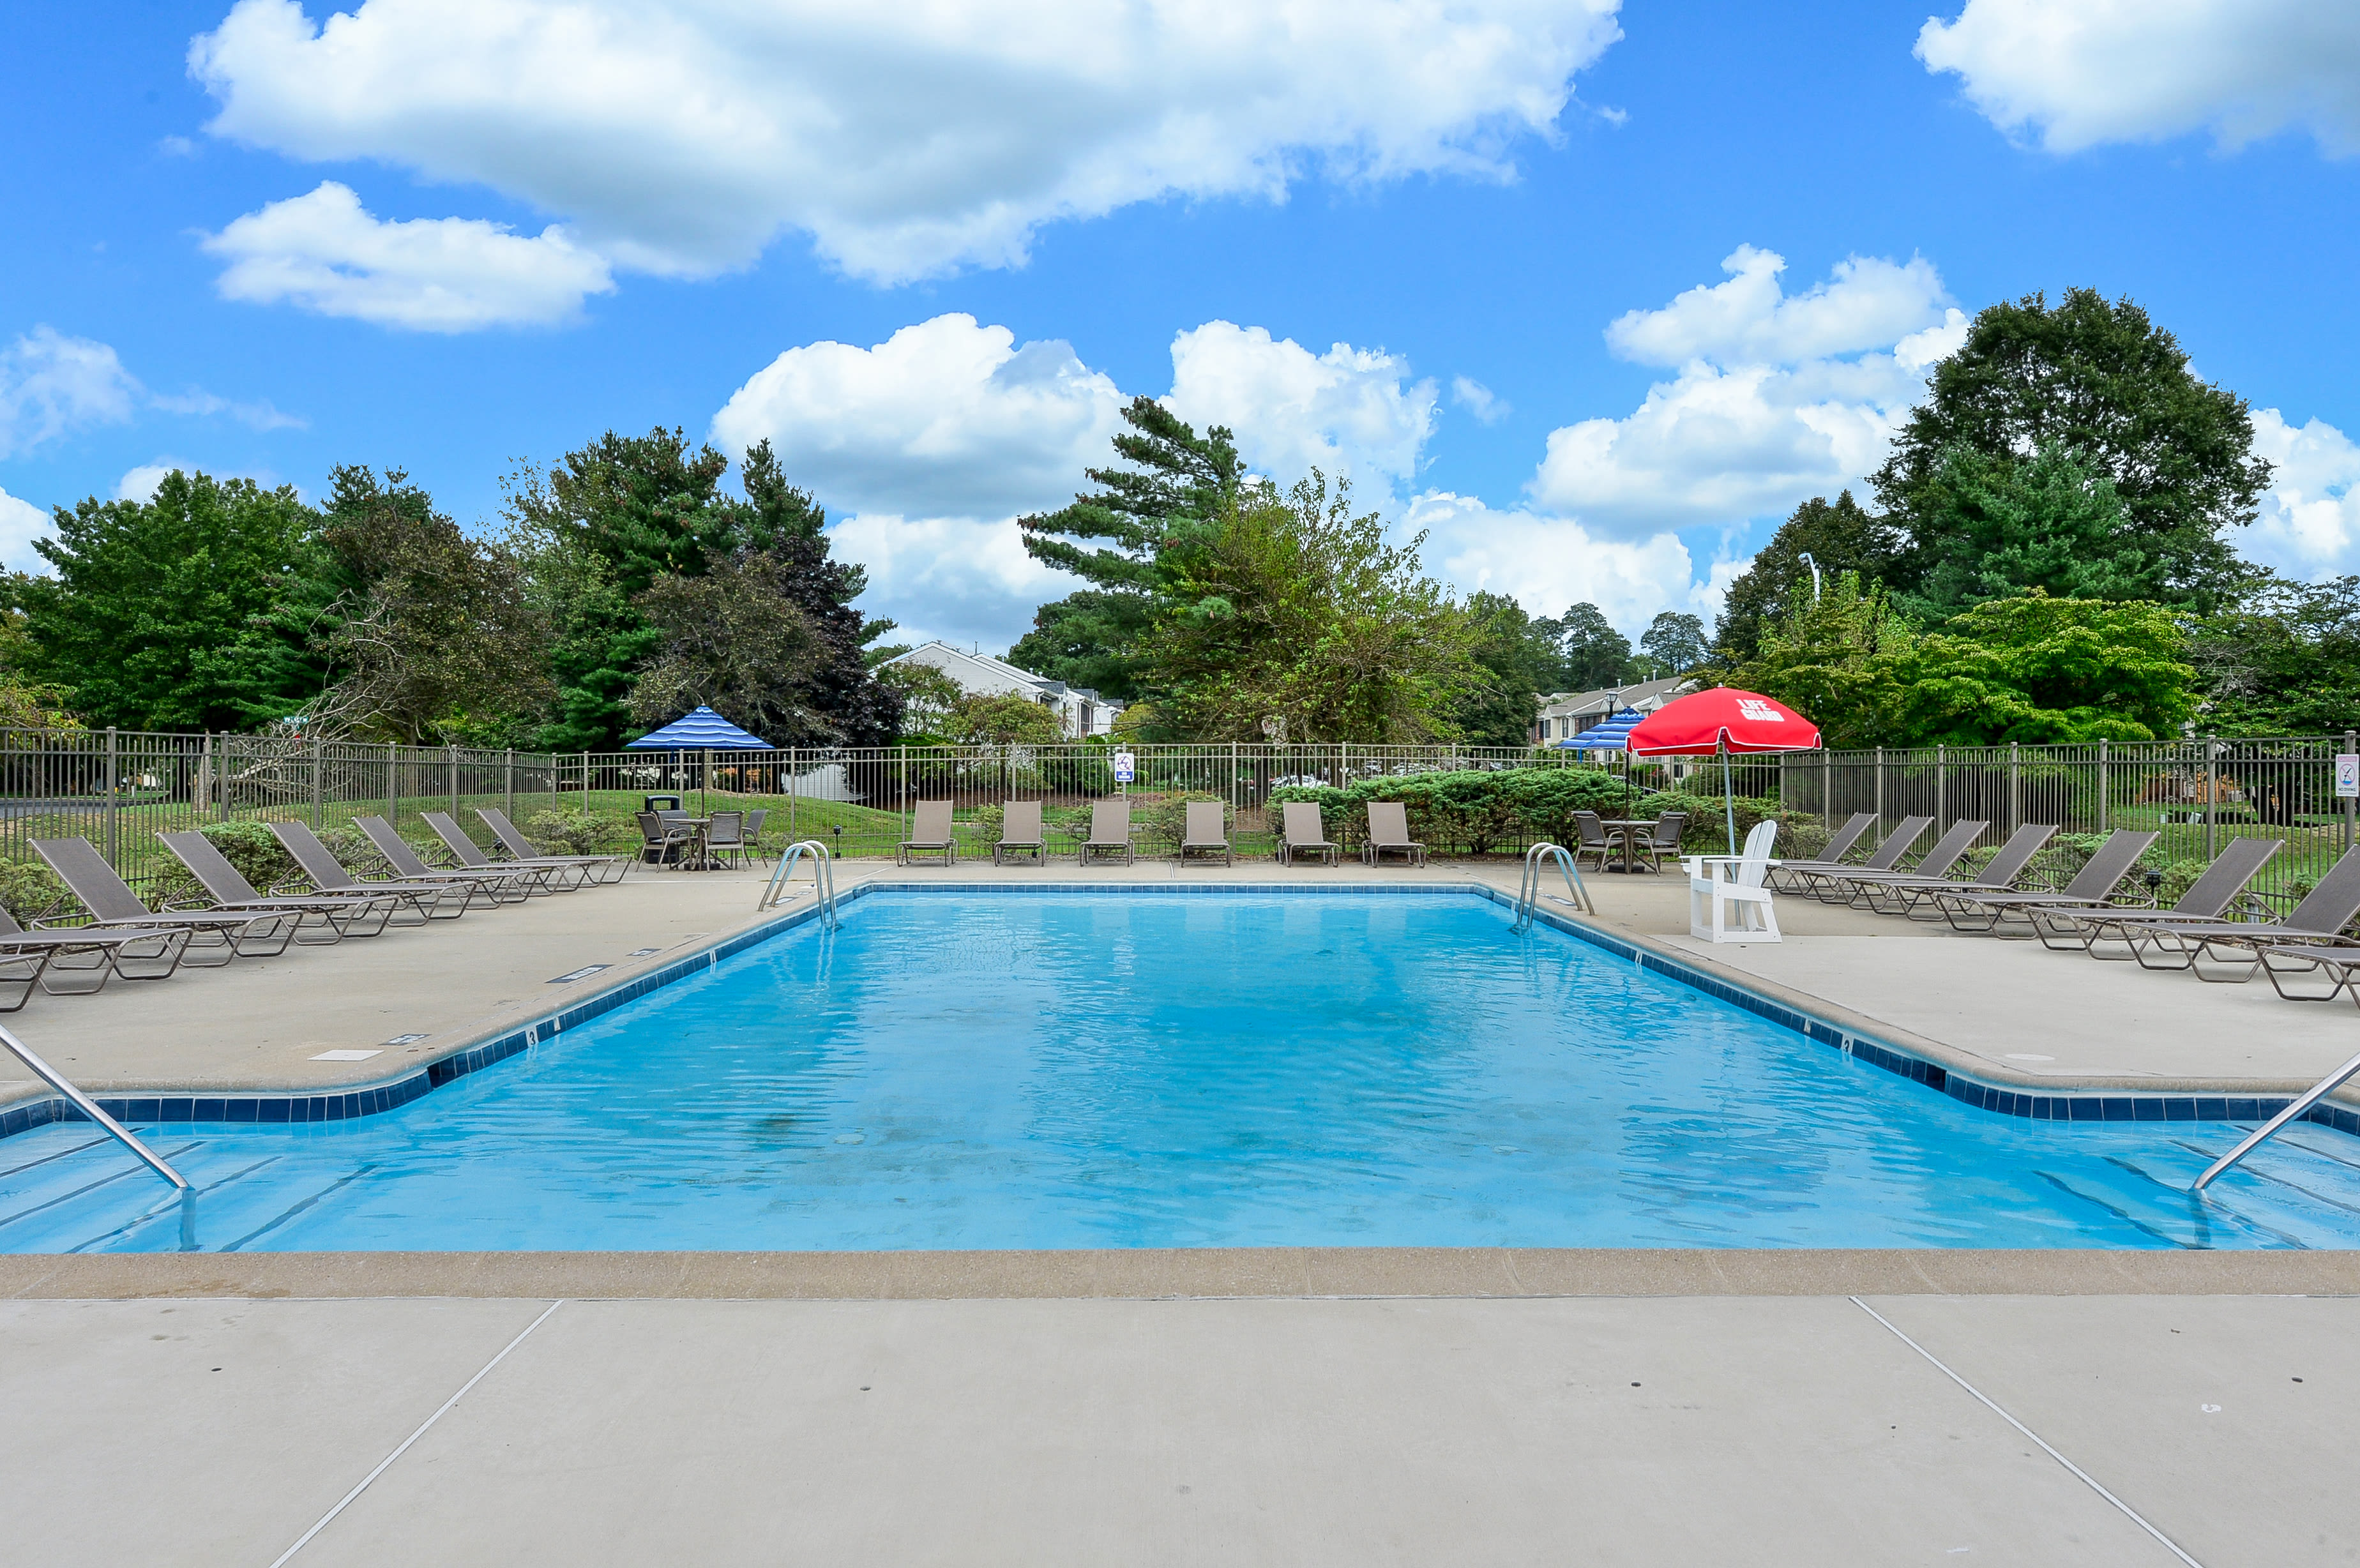 Sparkling swimming pool at Cranbury Crossing Apartment Homes in East Brunswick, New Jersey